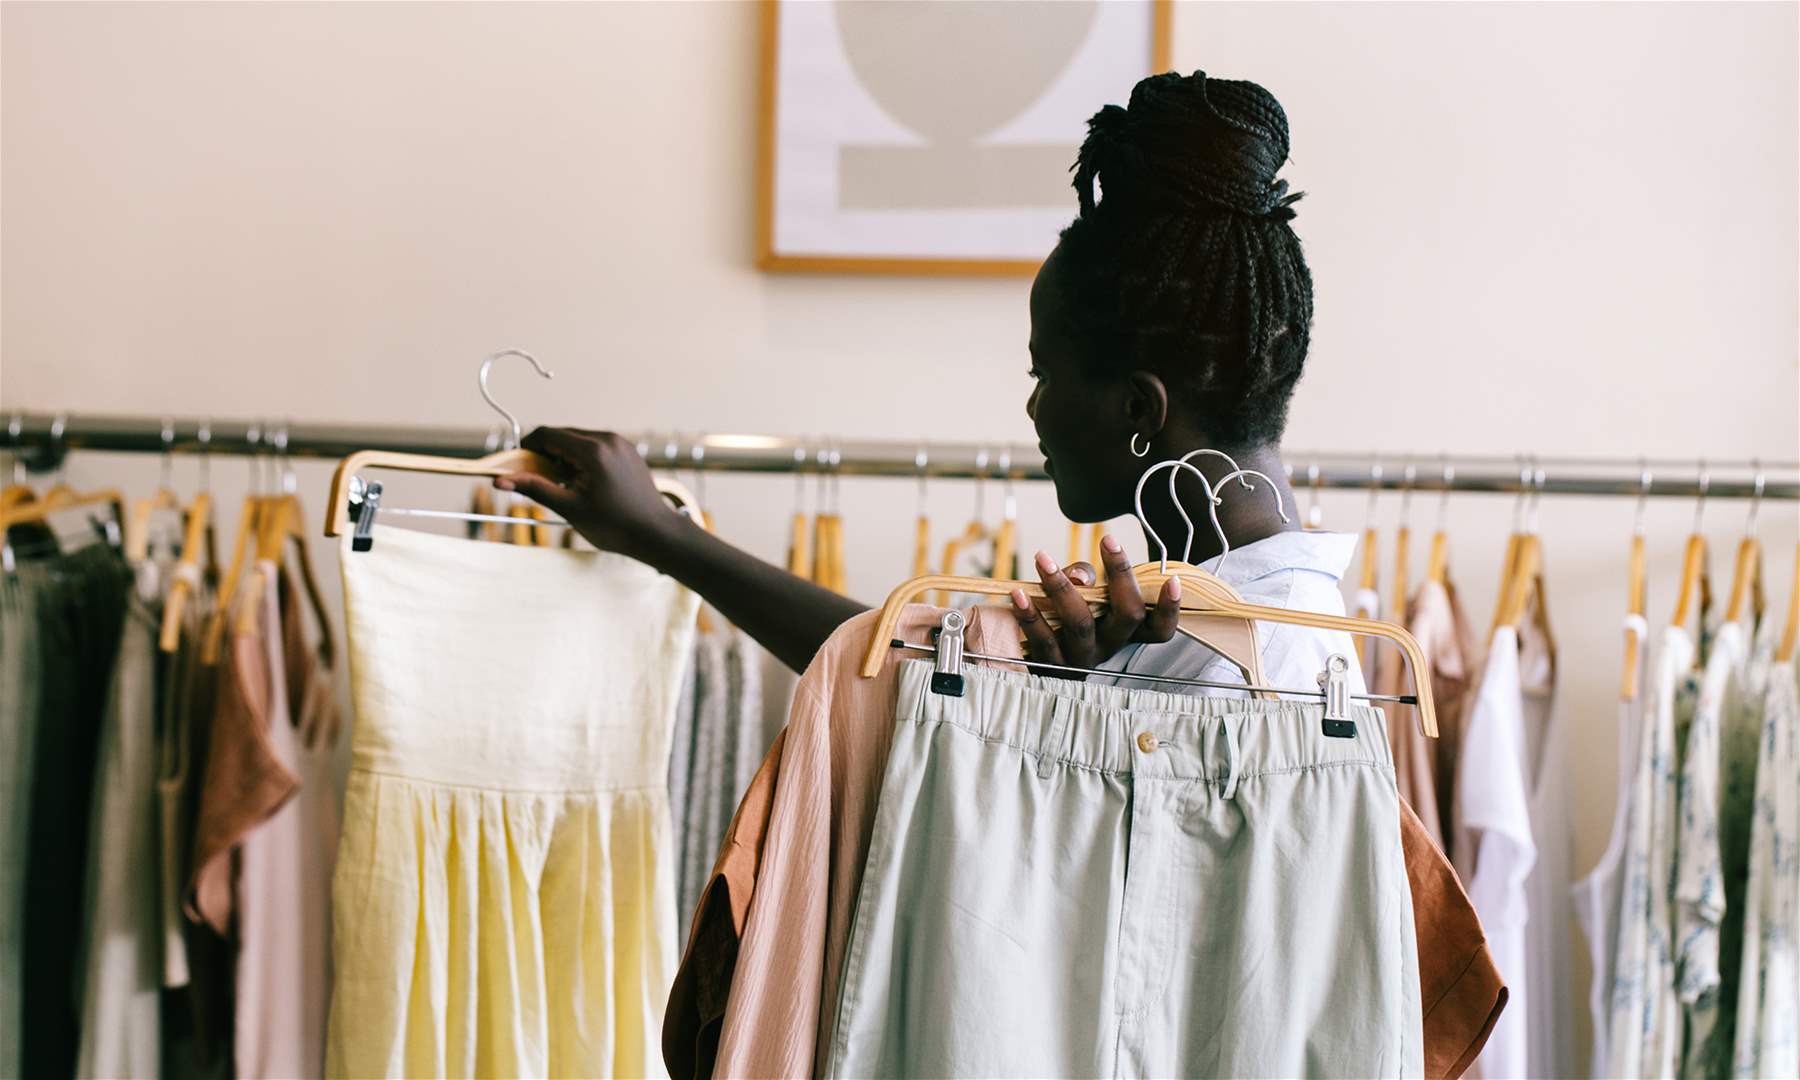 Ways you can change your fashion habits to help the planet